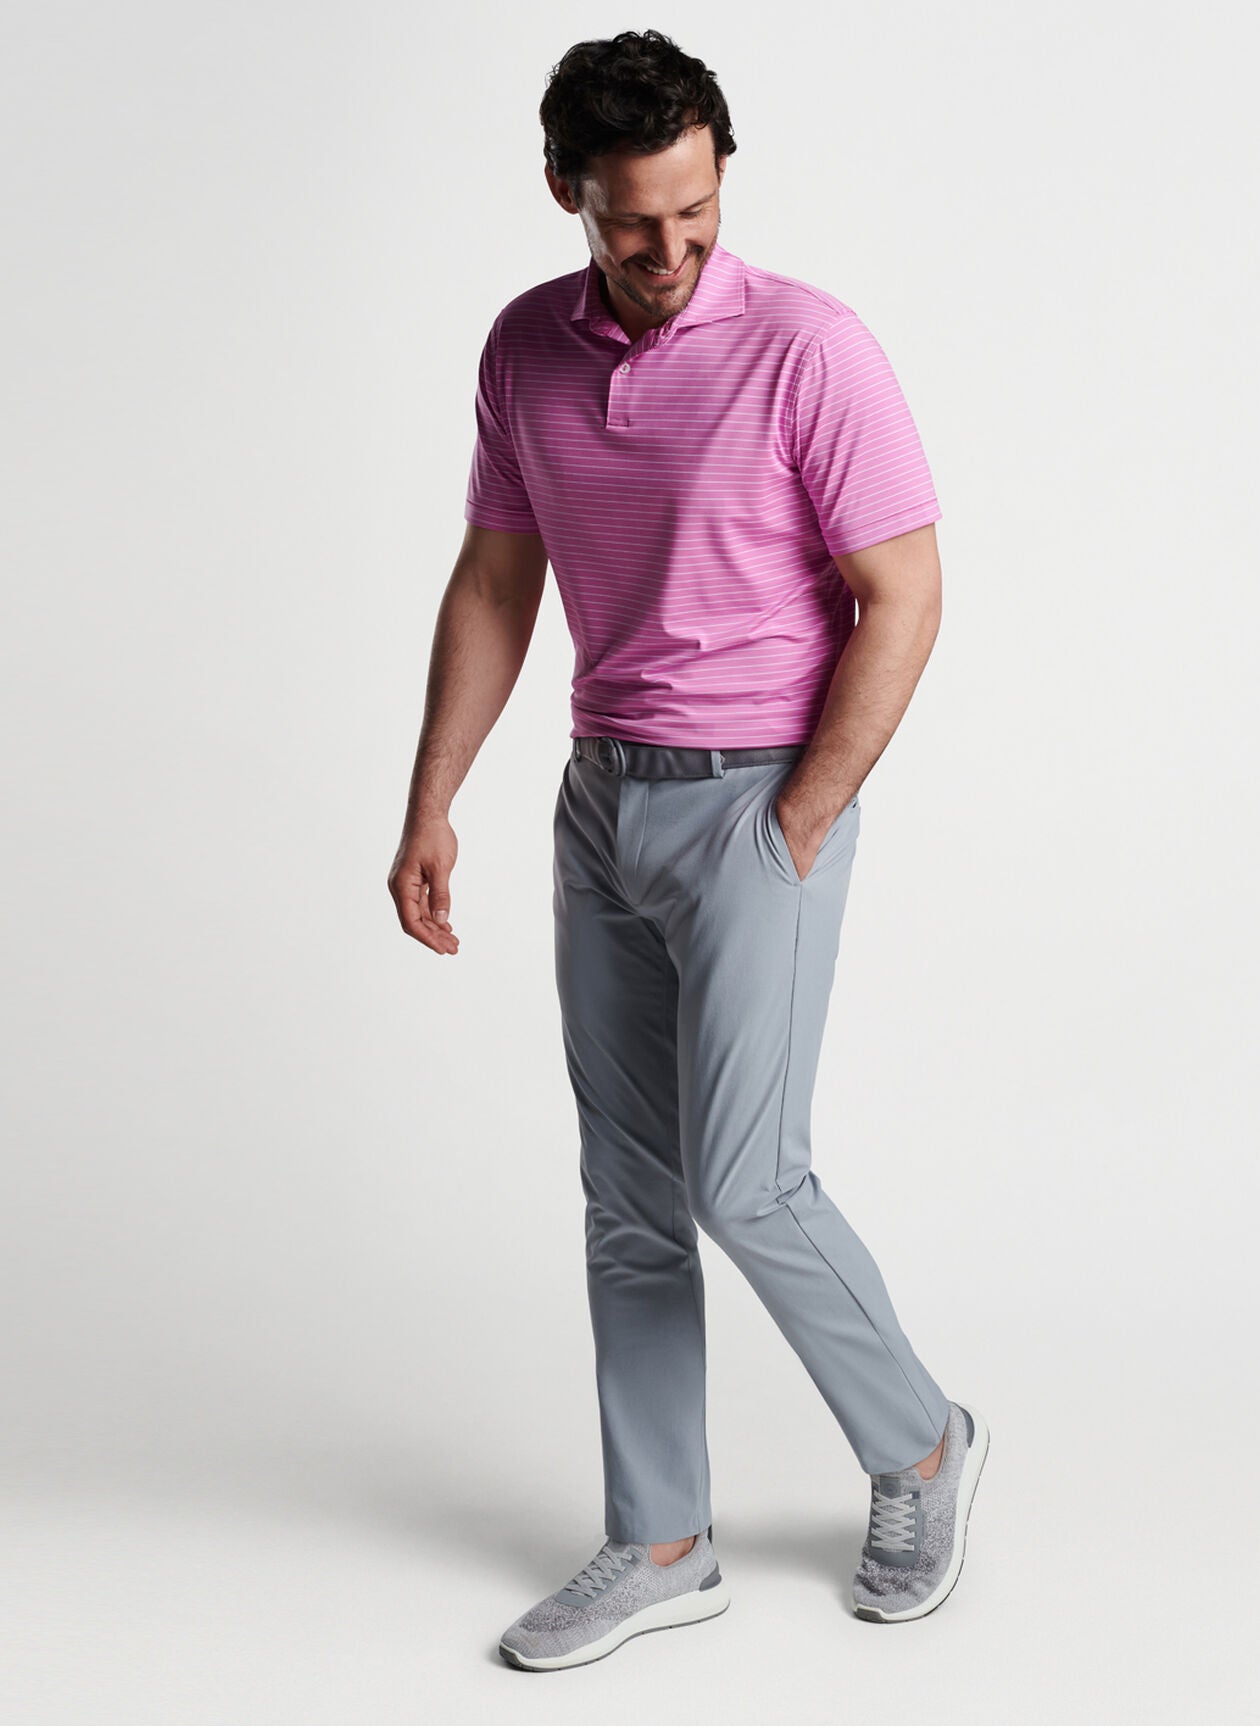 Gale Grey Surge Performance Trouser